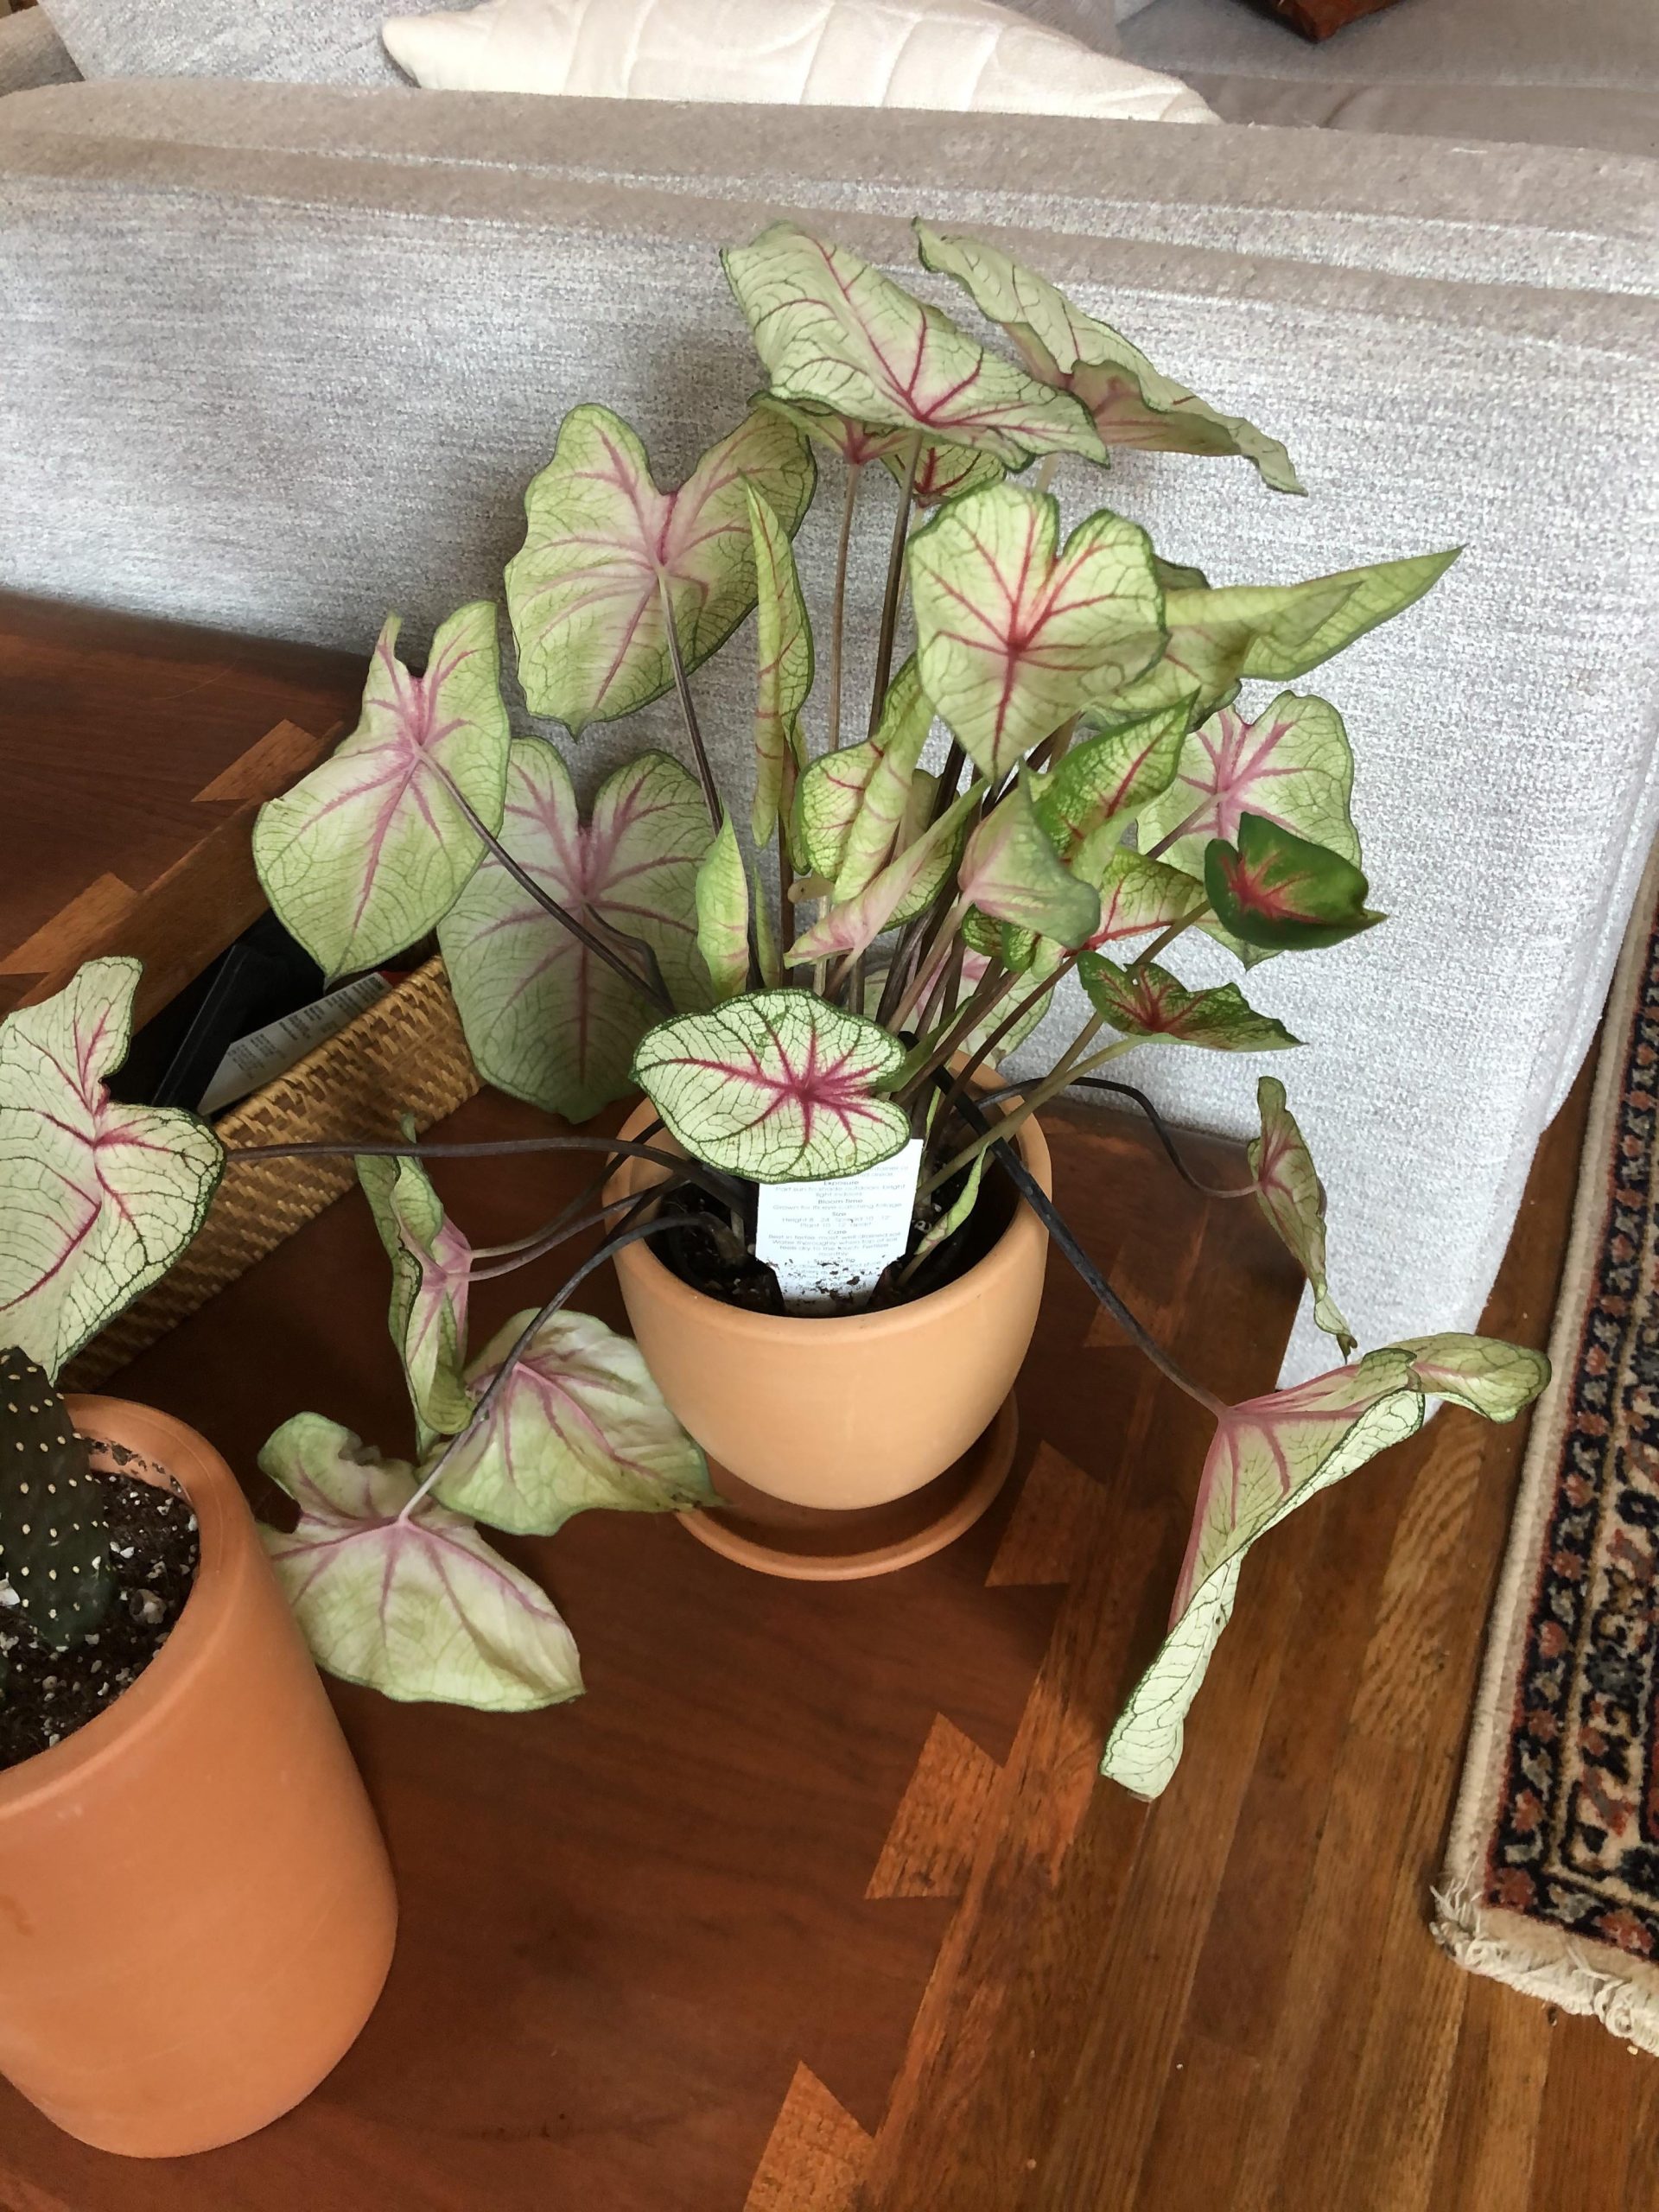 Why is My Caladium Stems Drooping